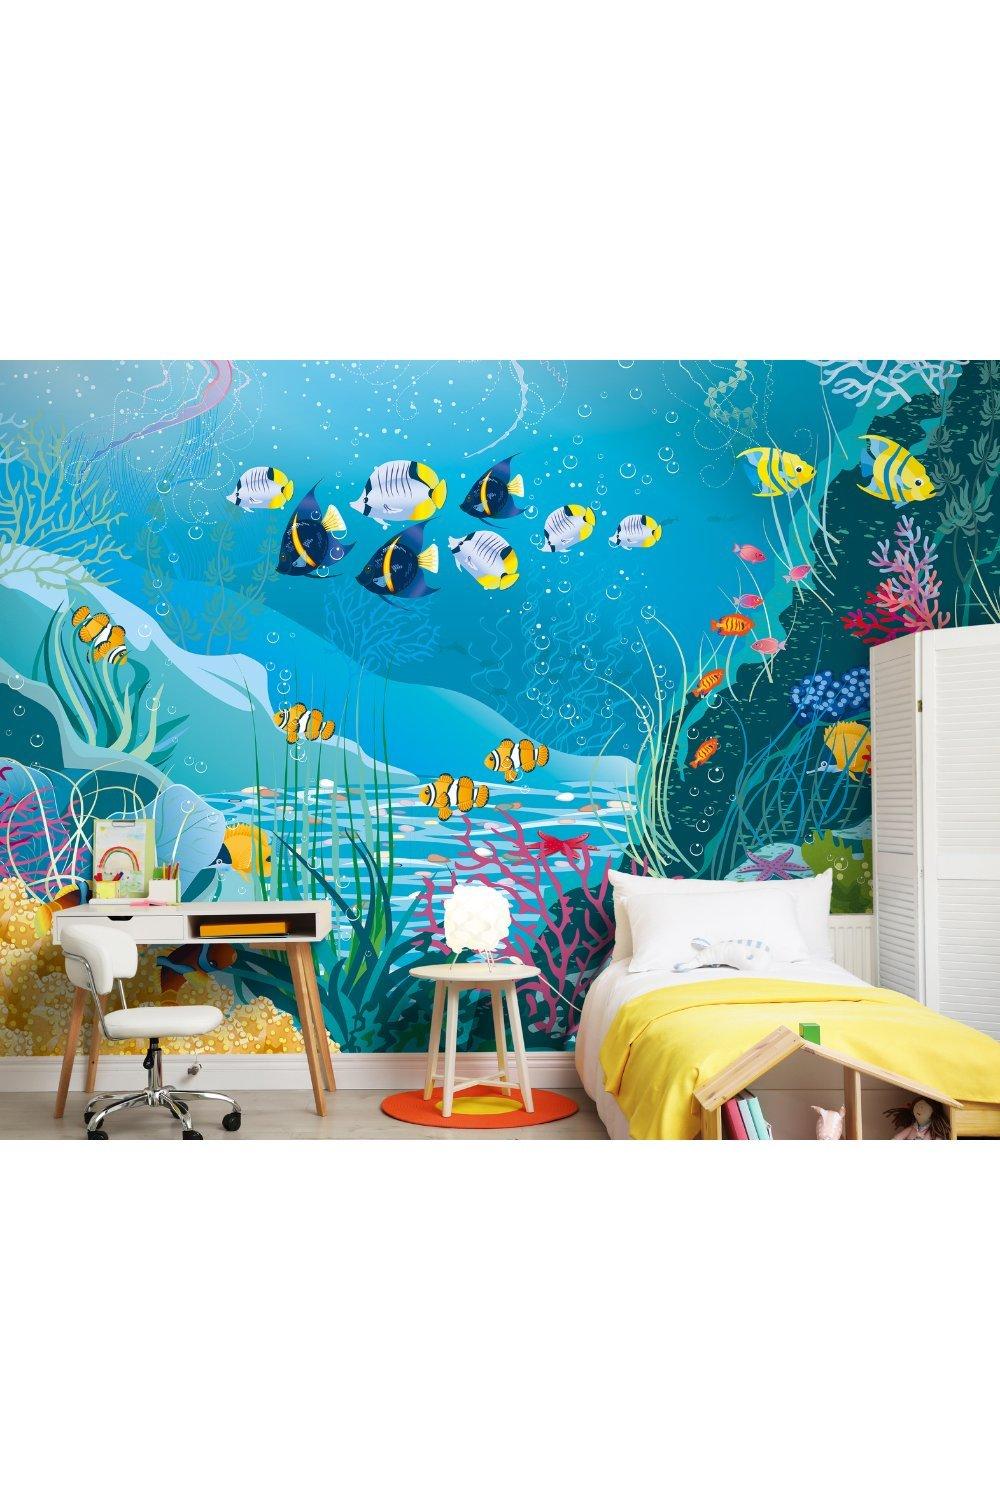 Under The Sea Adventure Wall Mural